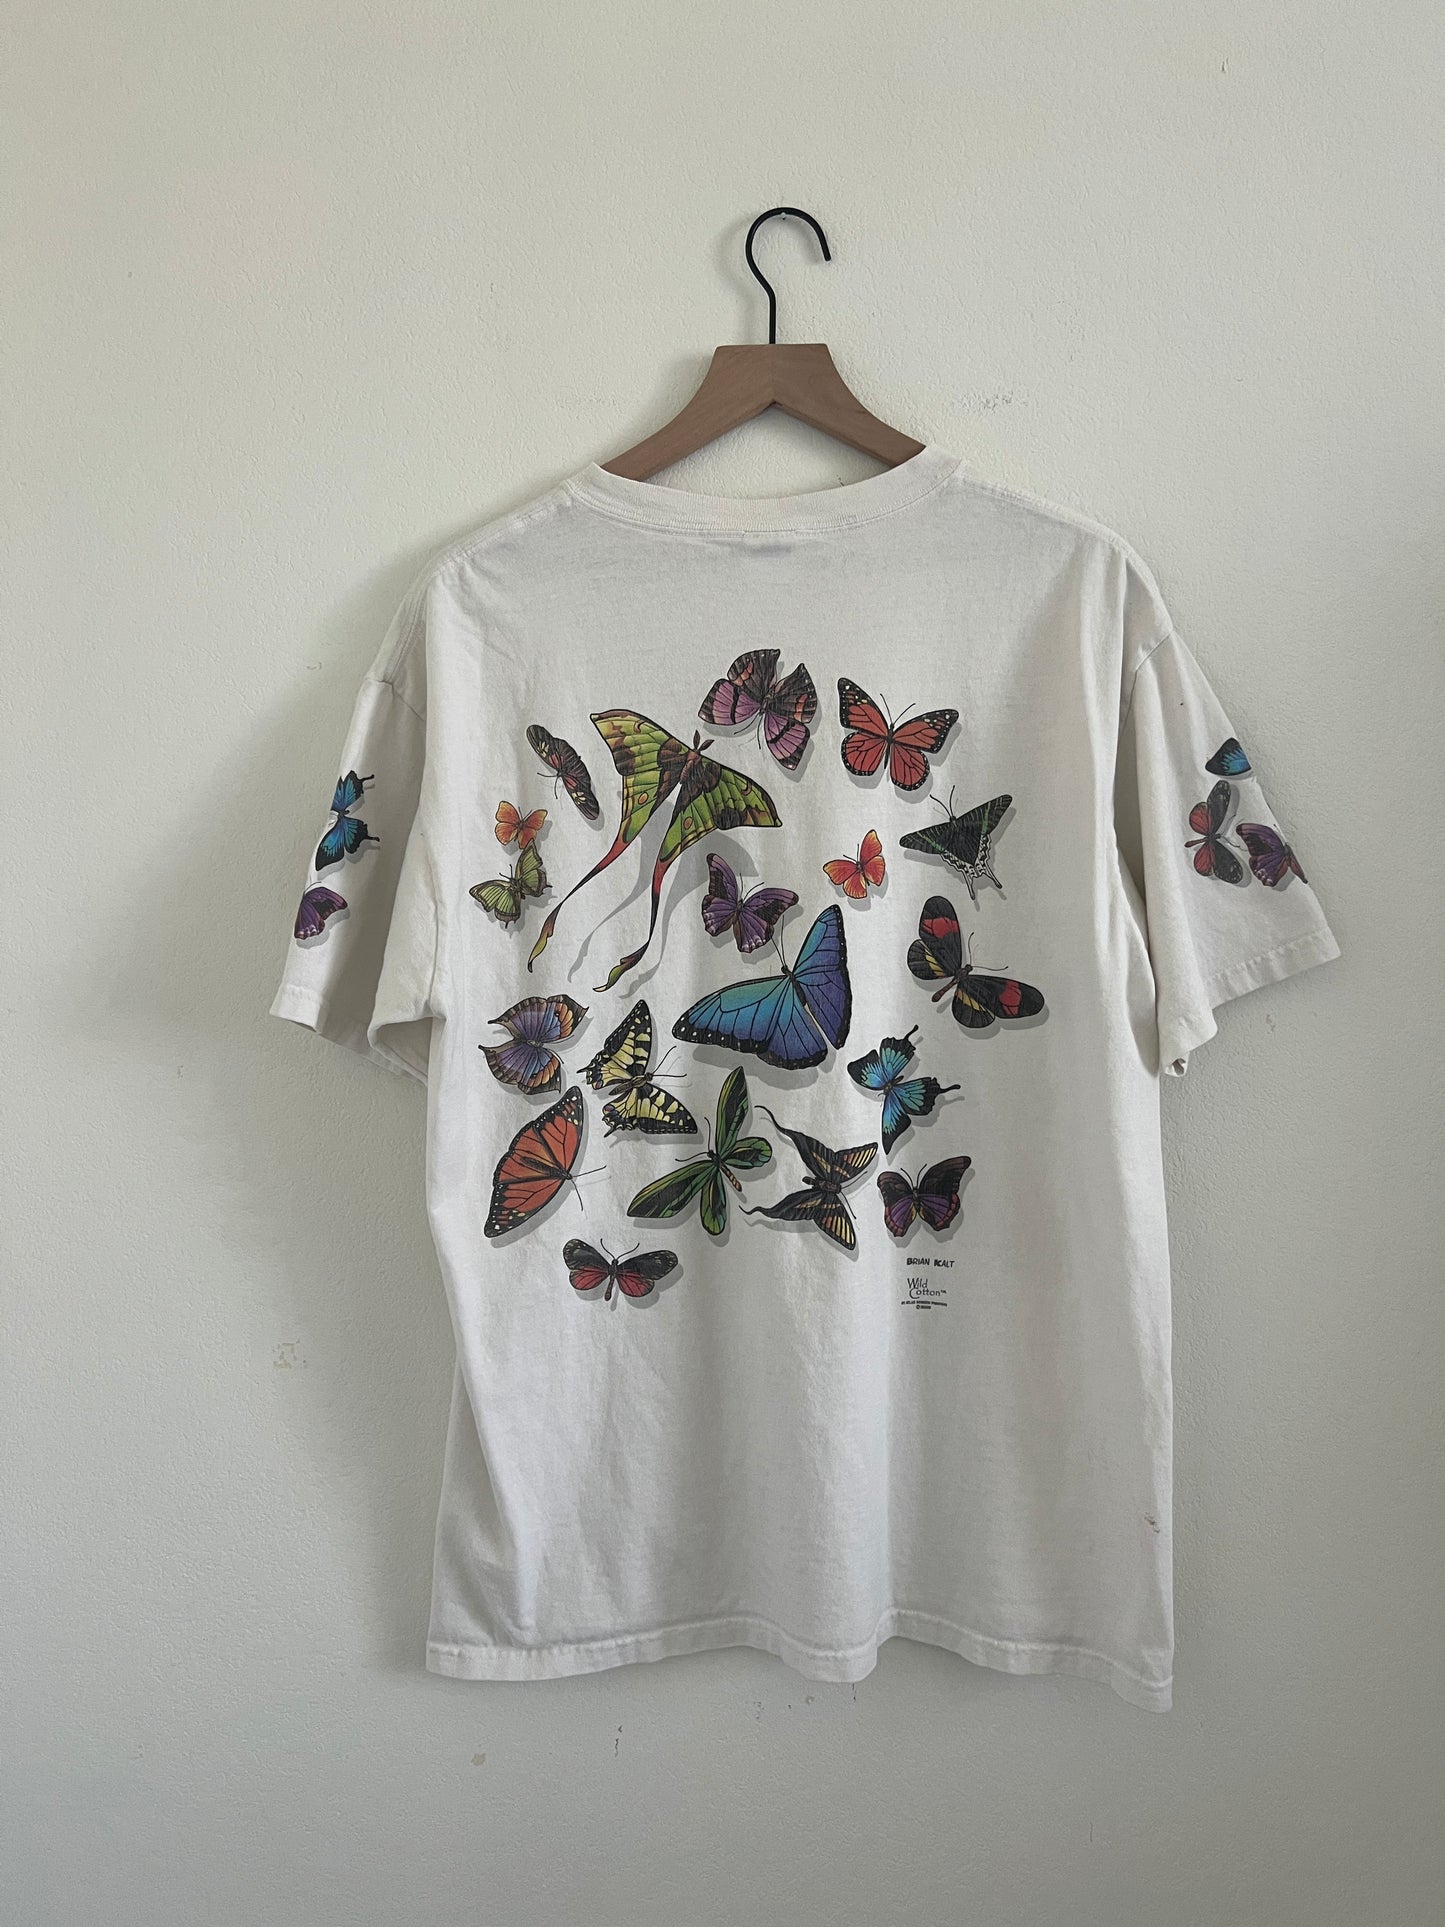 Vintage Butterfly Place Tee (L)